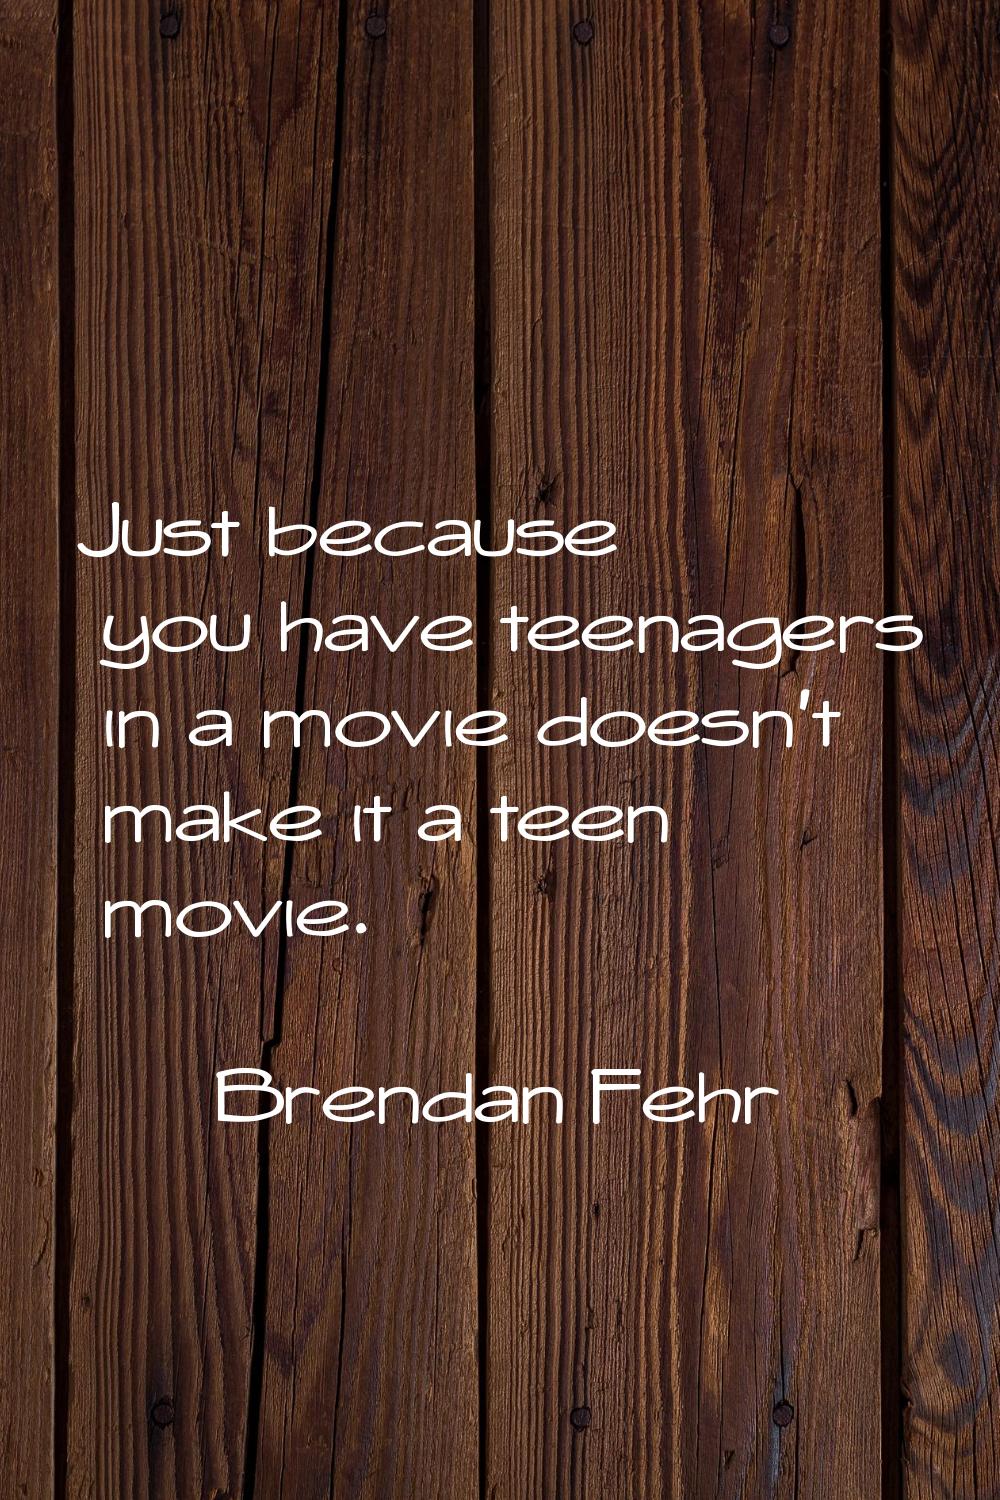 Just because you have teenagers in a movie doesn't make it a teen movie.